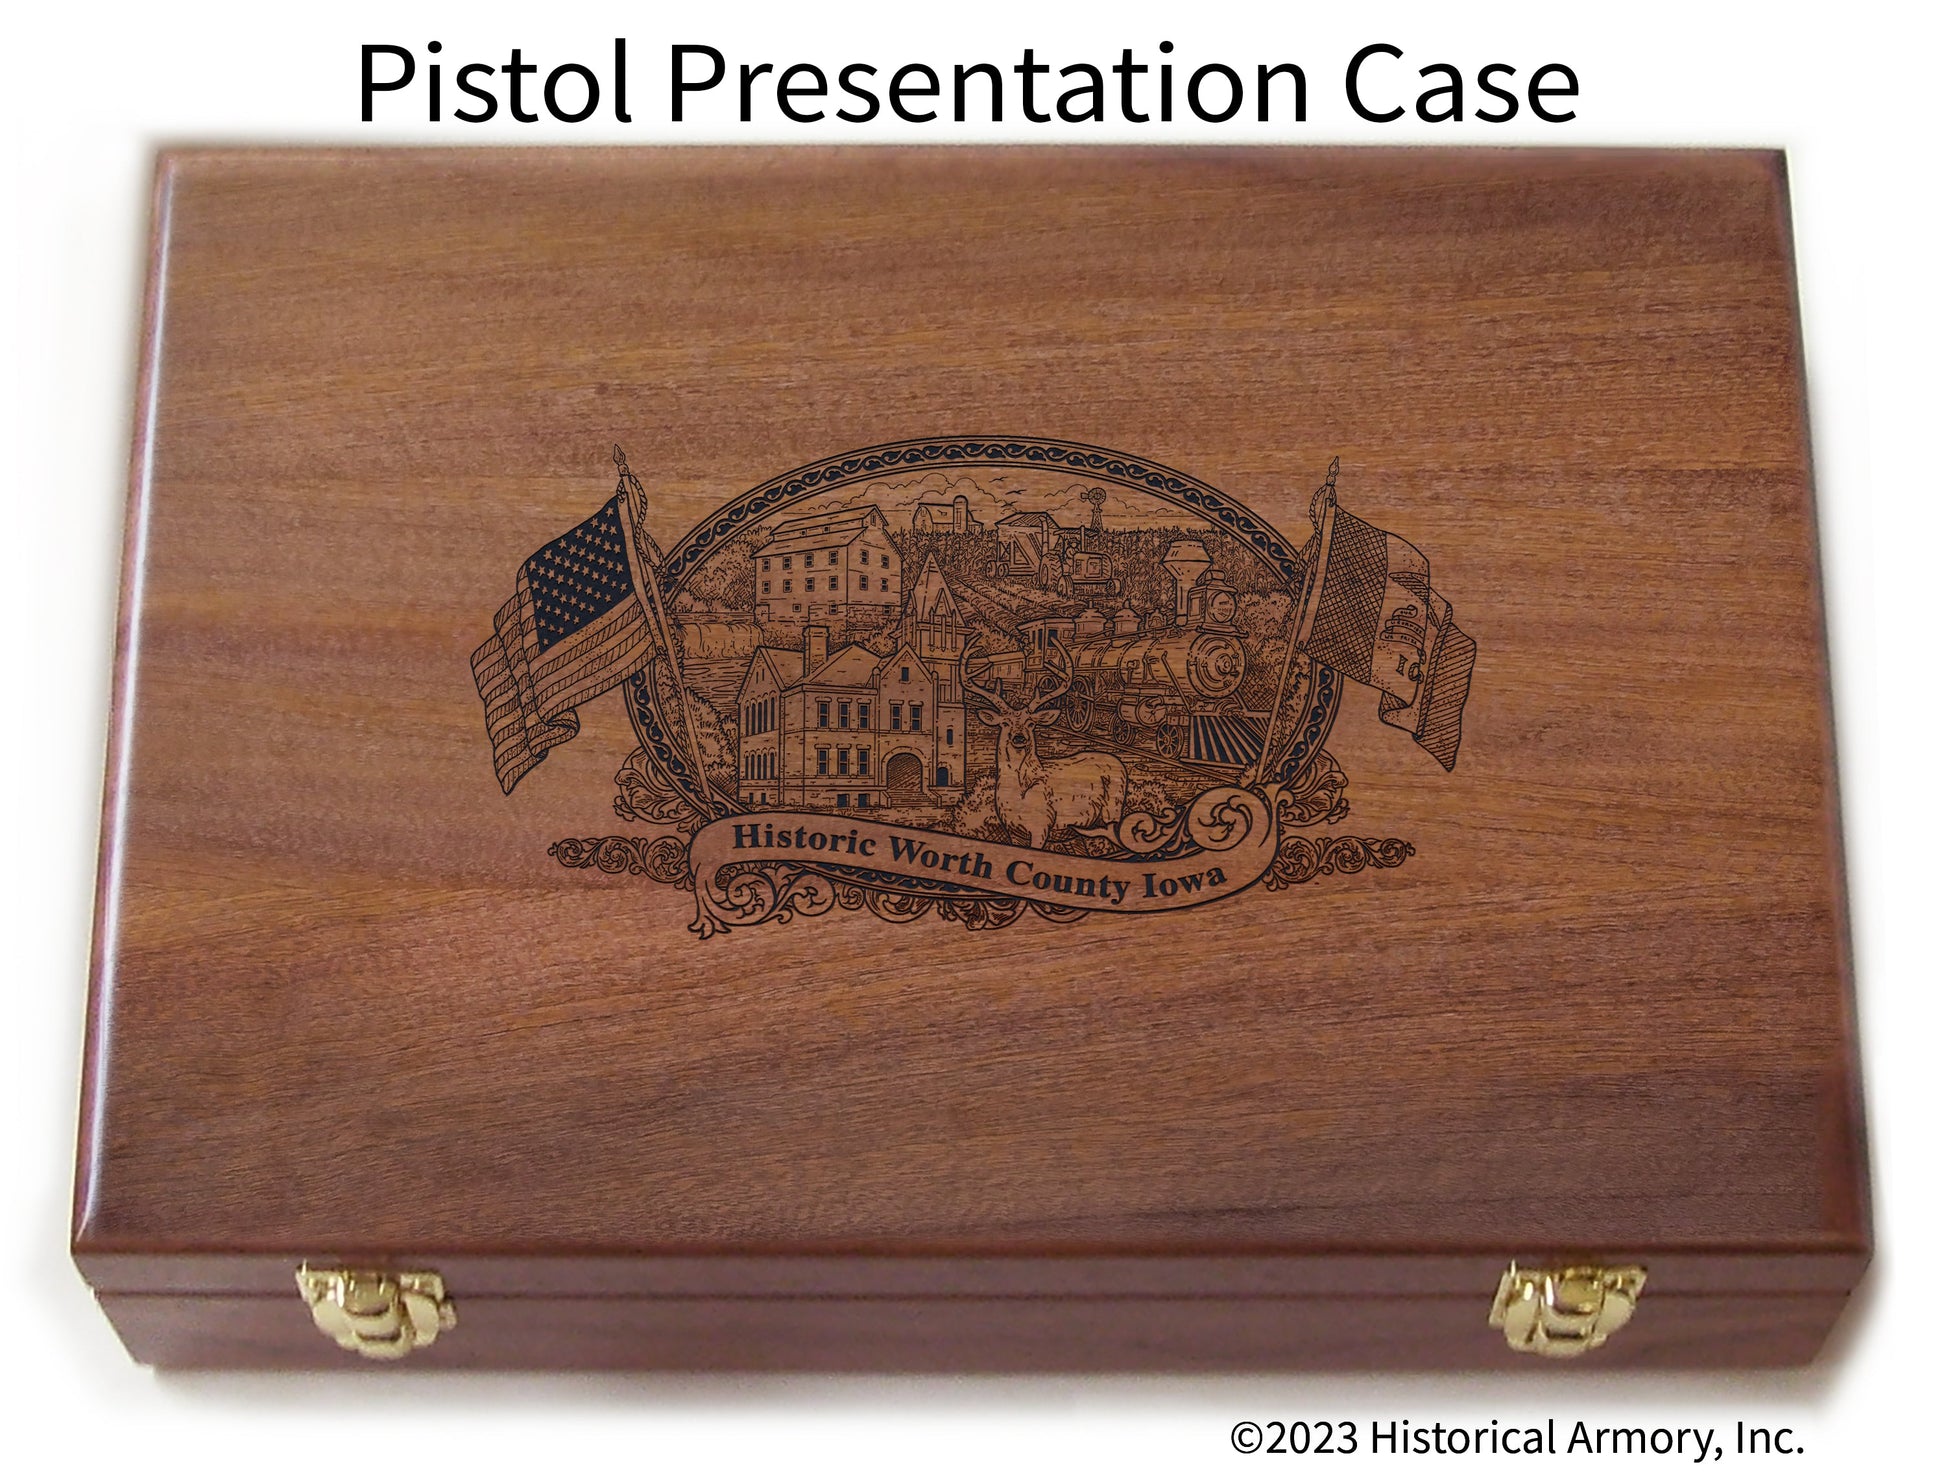 Worth County Iowa Engraved .45 Auto Ruger 1911 Presentation Case